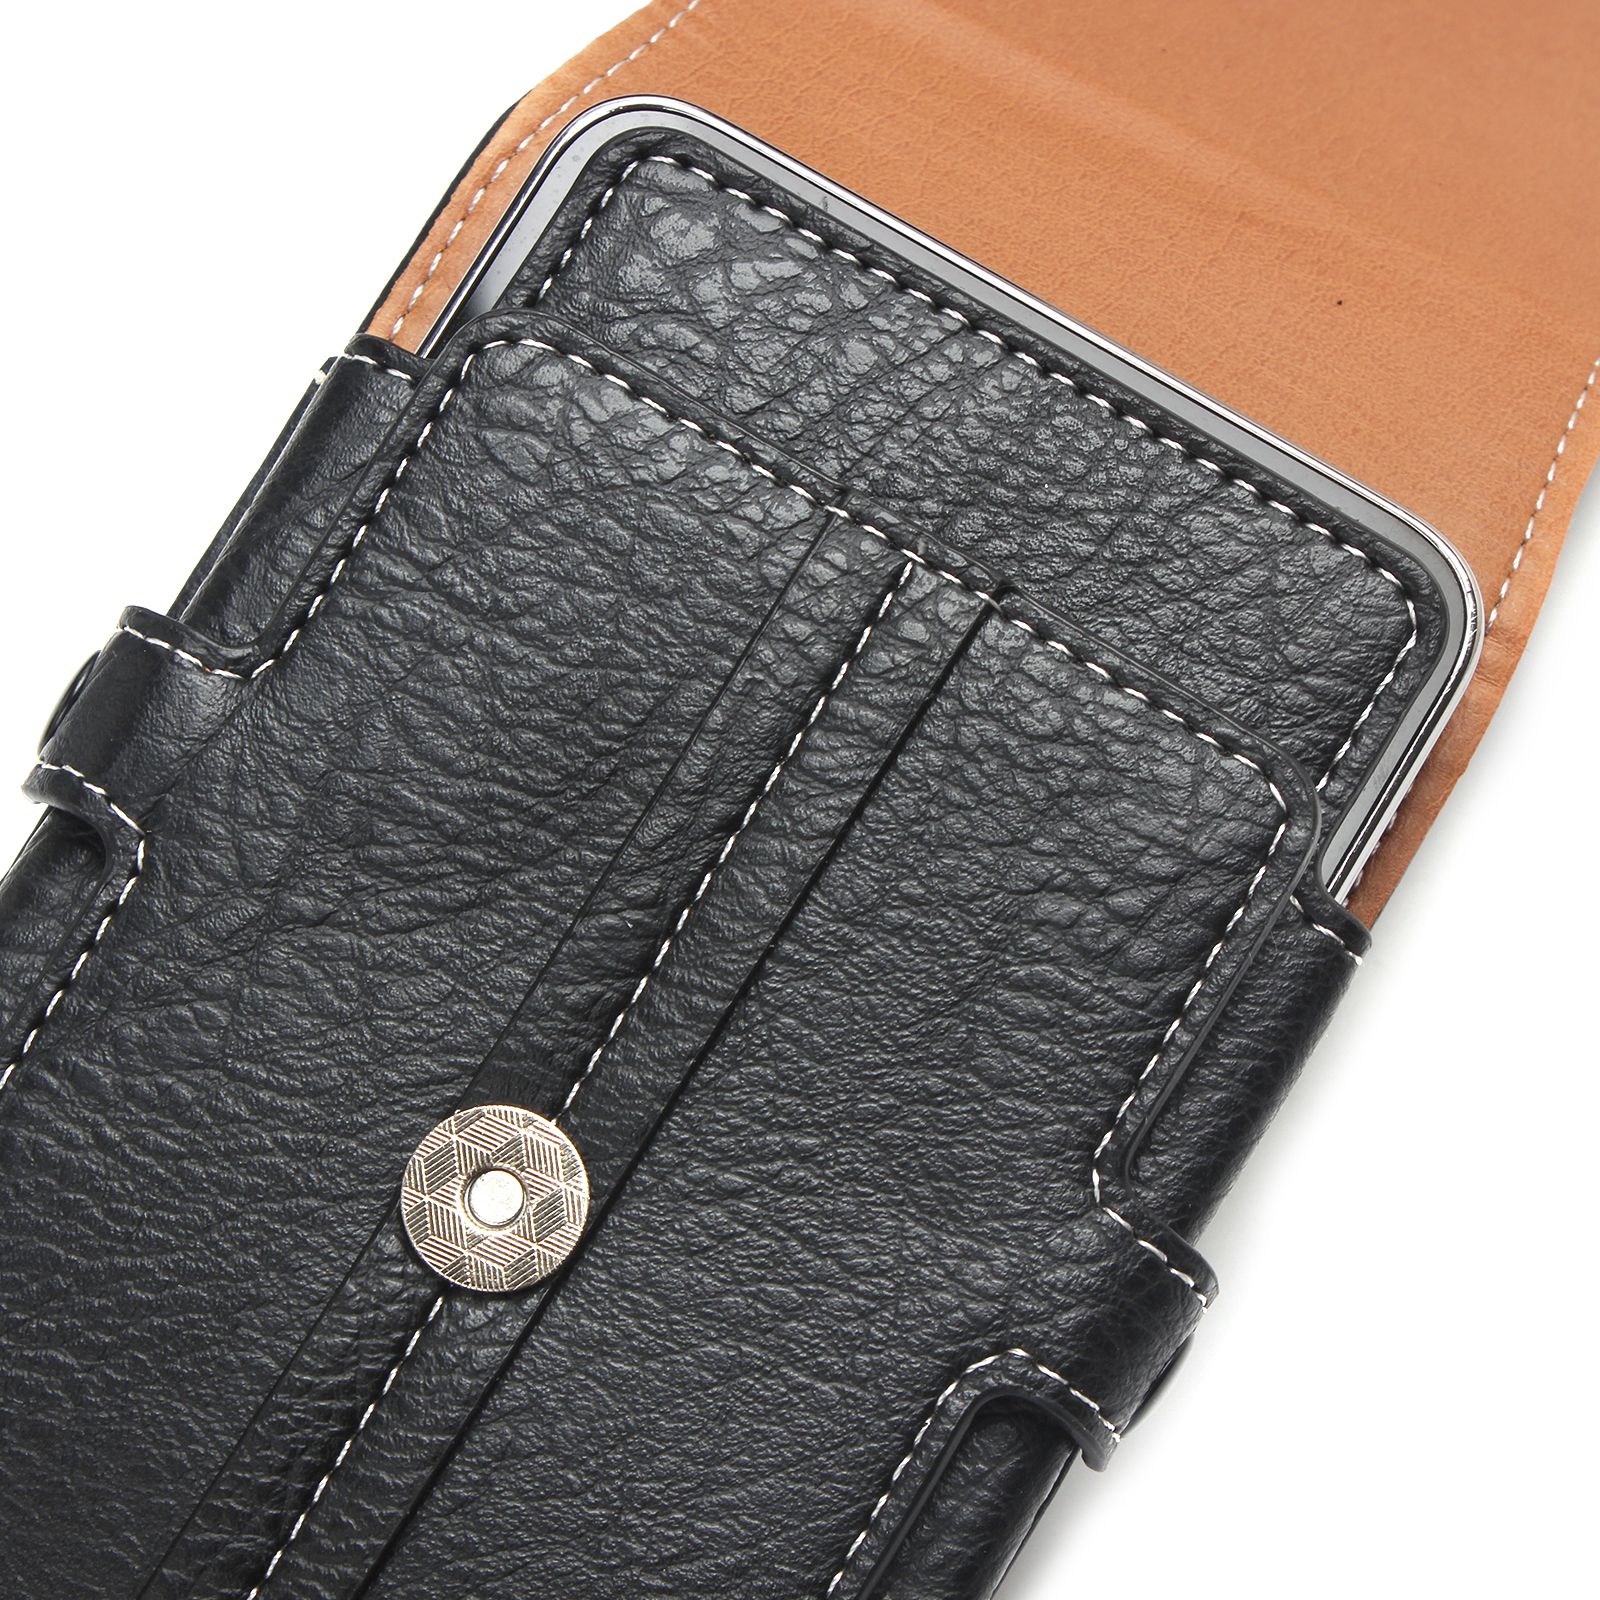 Bakeey-Casual-Vintage-Bussiness-64-inch-Vertical-Multi-Pocket-Multi-Card-Slot-PU-Leather-Mobile-Phon-1692765-7